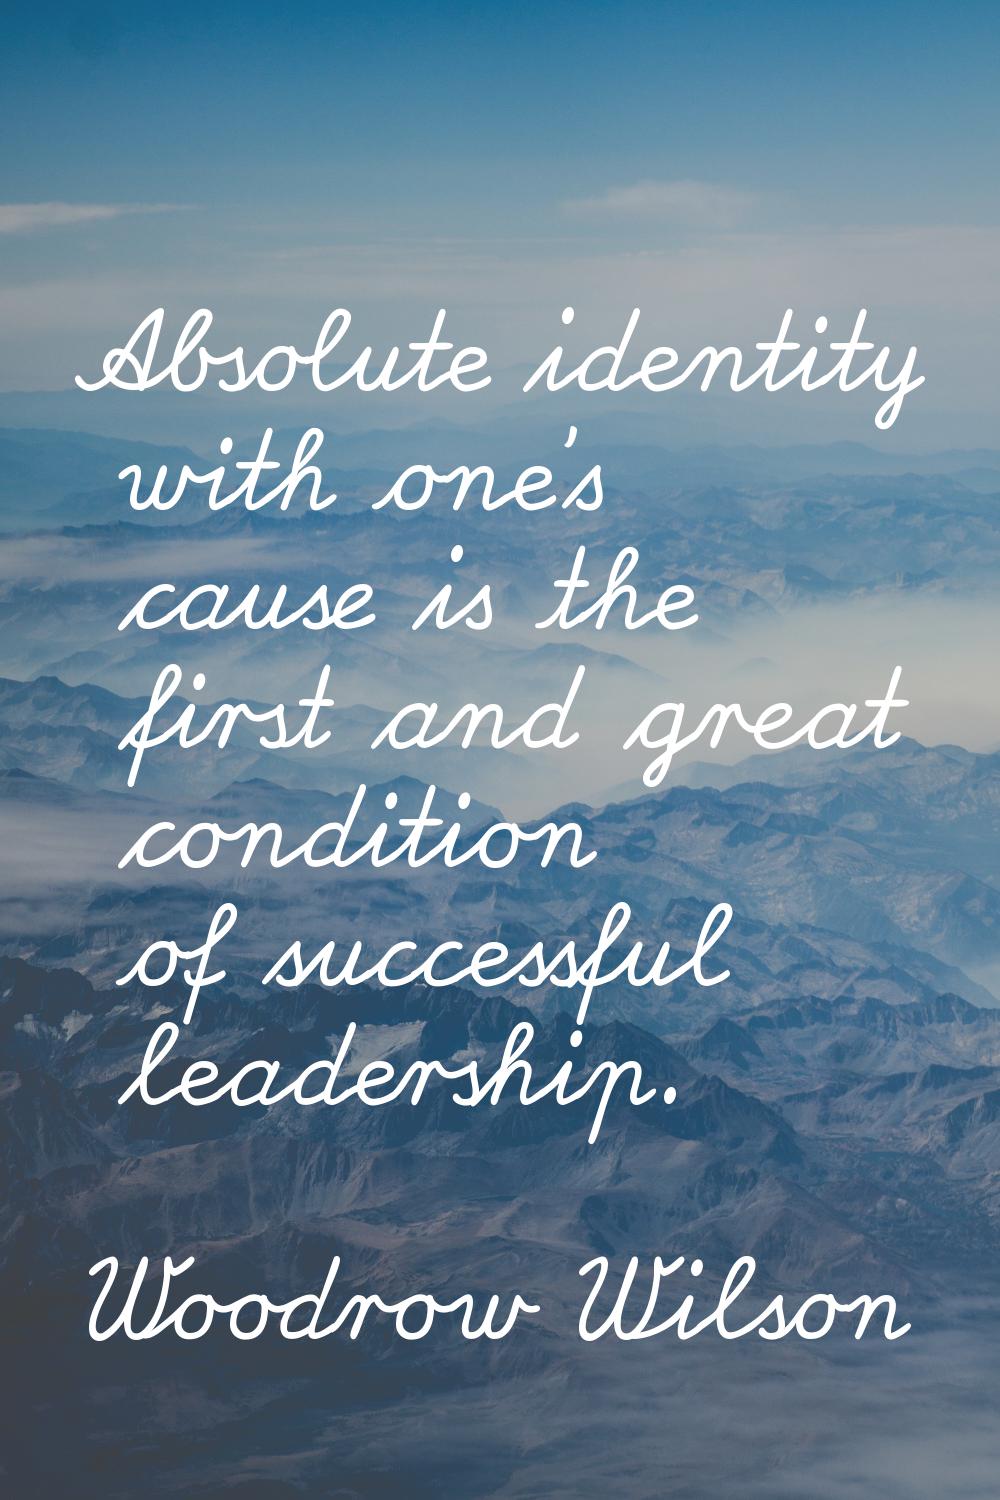 Absolute identity with one's cause is the first and great condition of successful leadership.